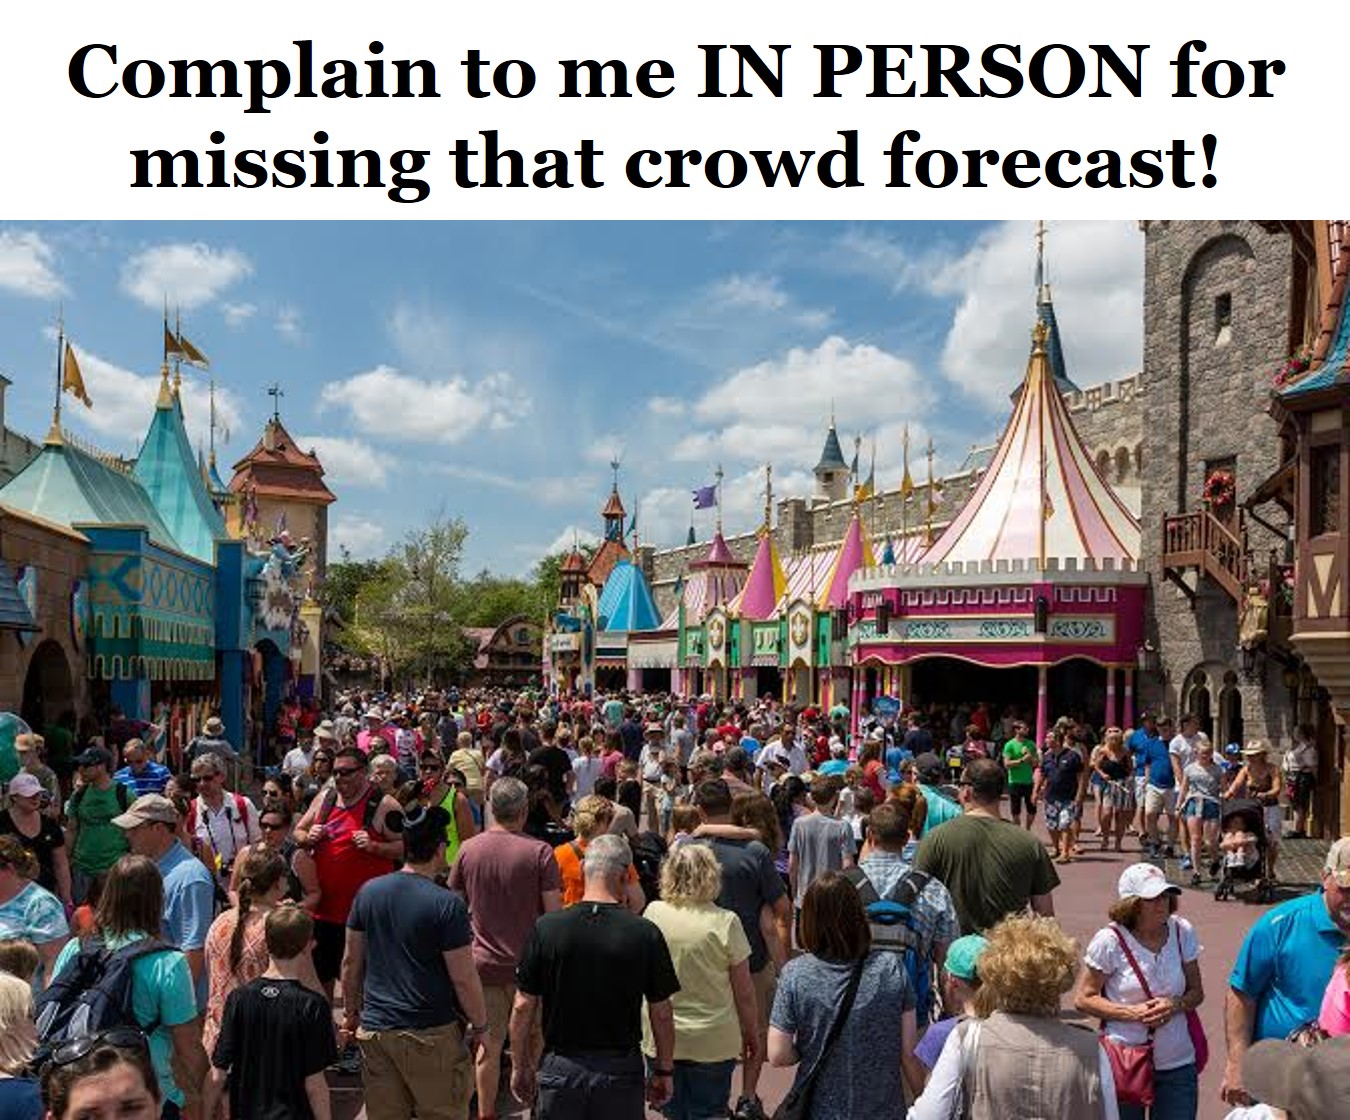 (easyWDW image, used with permission but defaced as I chose)